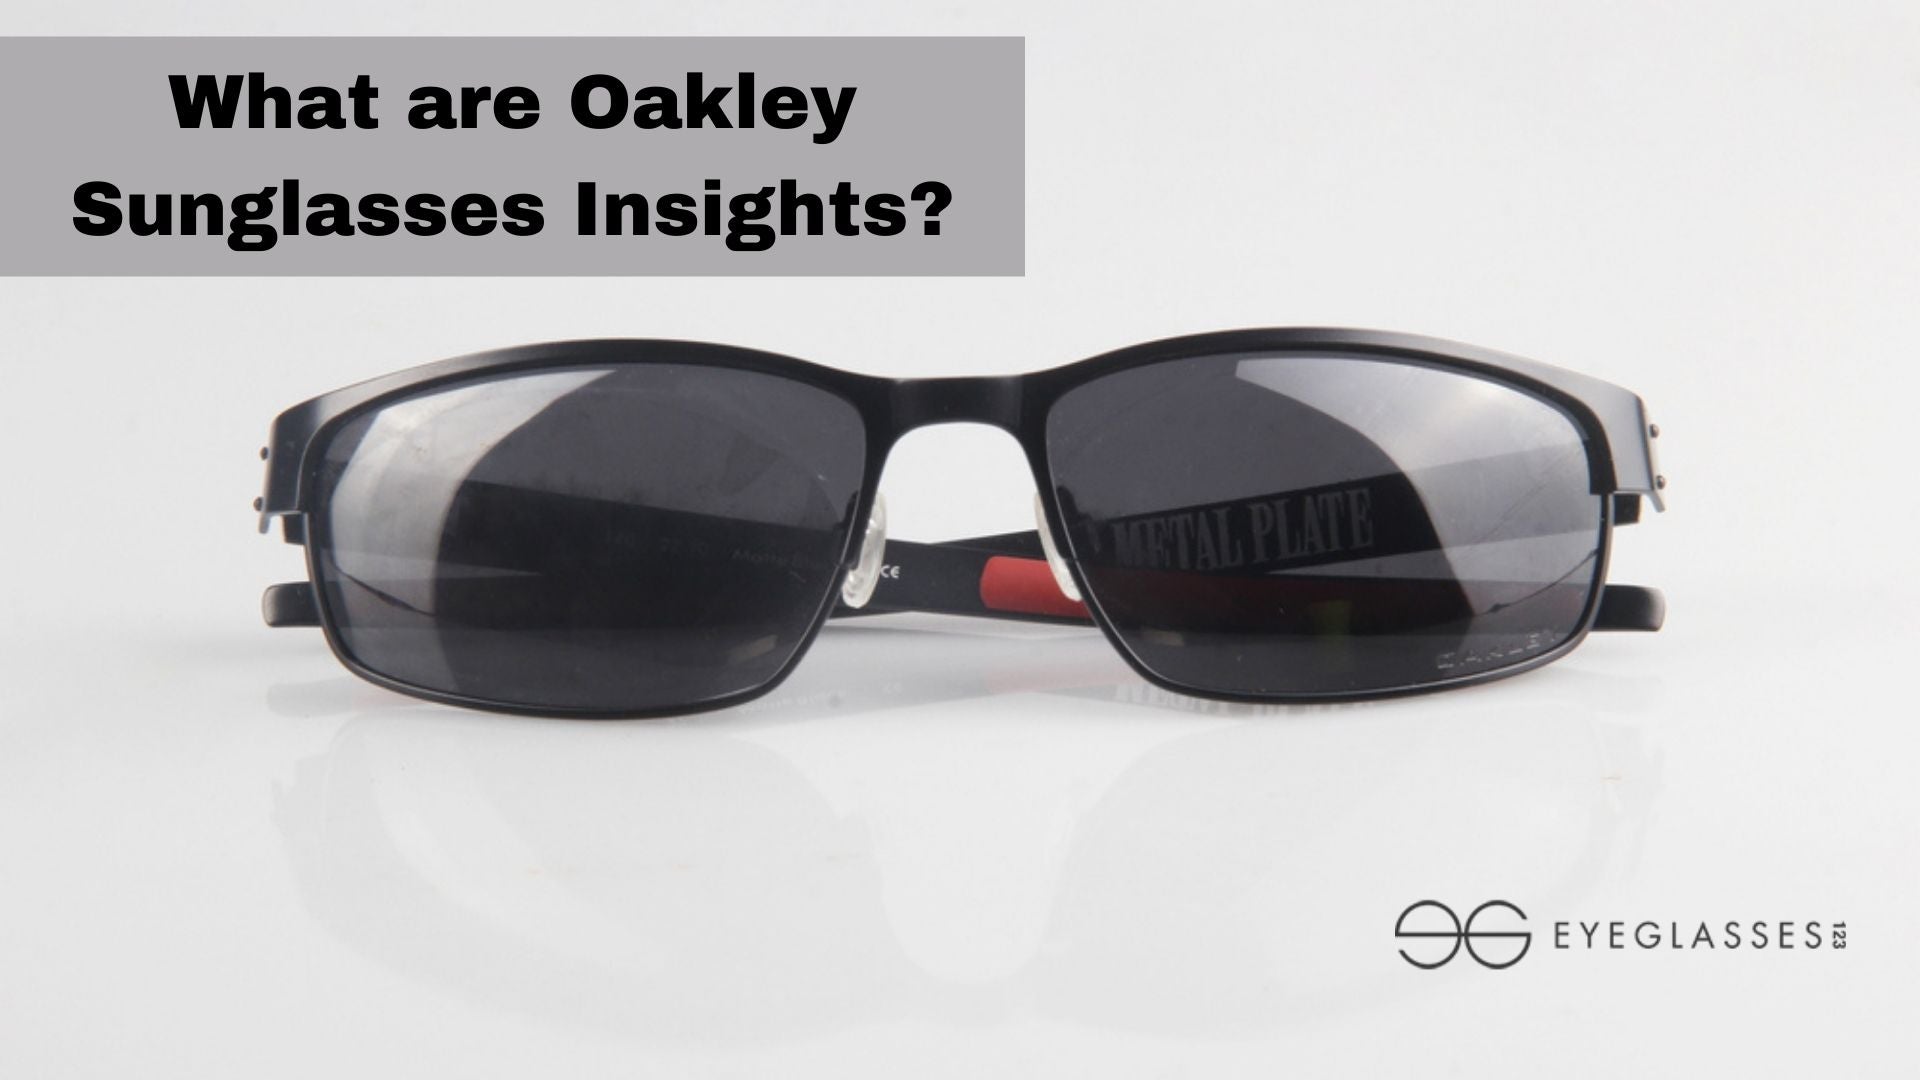 What are Oakley Sunglasses Insights?